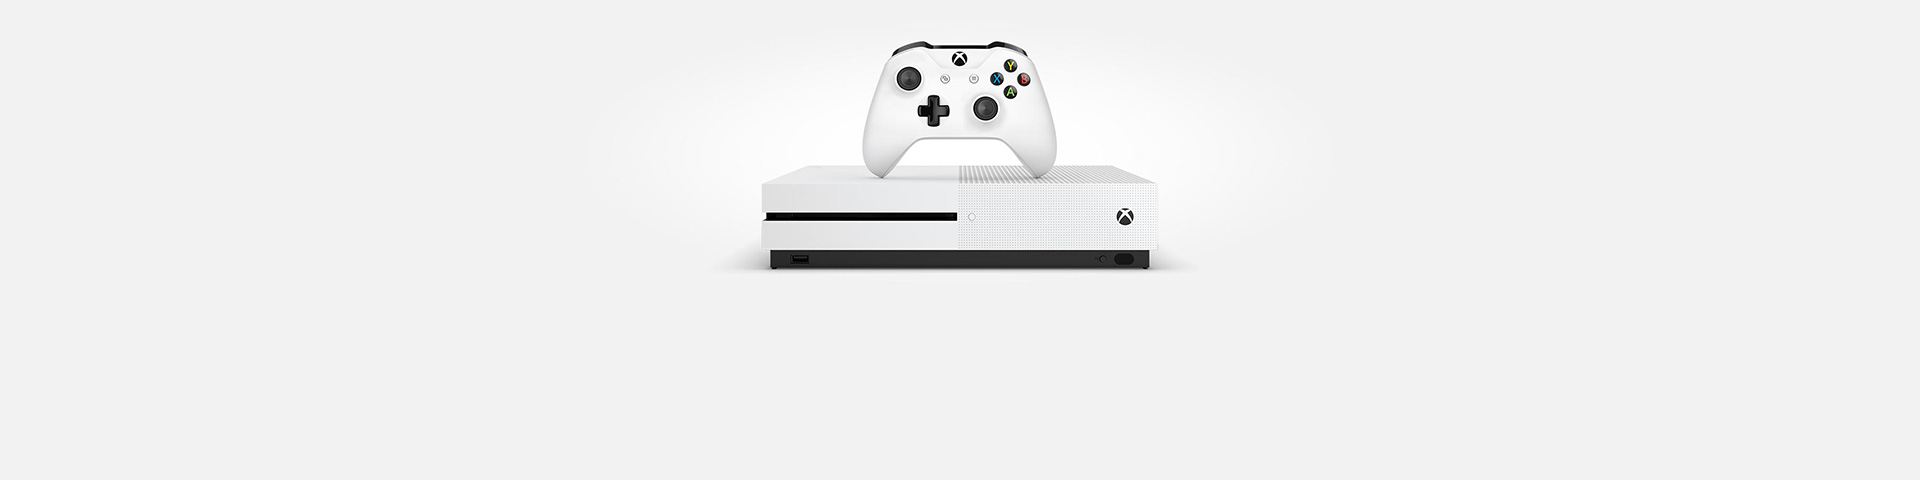 Xbox One S console and controller, buy now